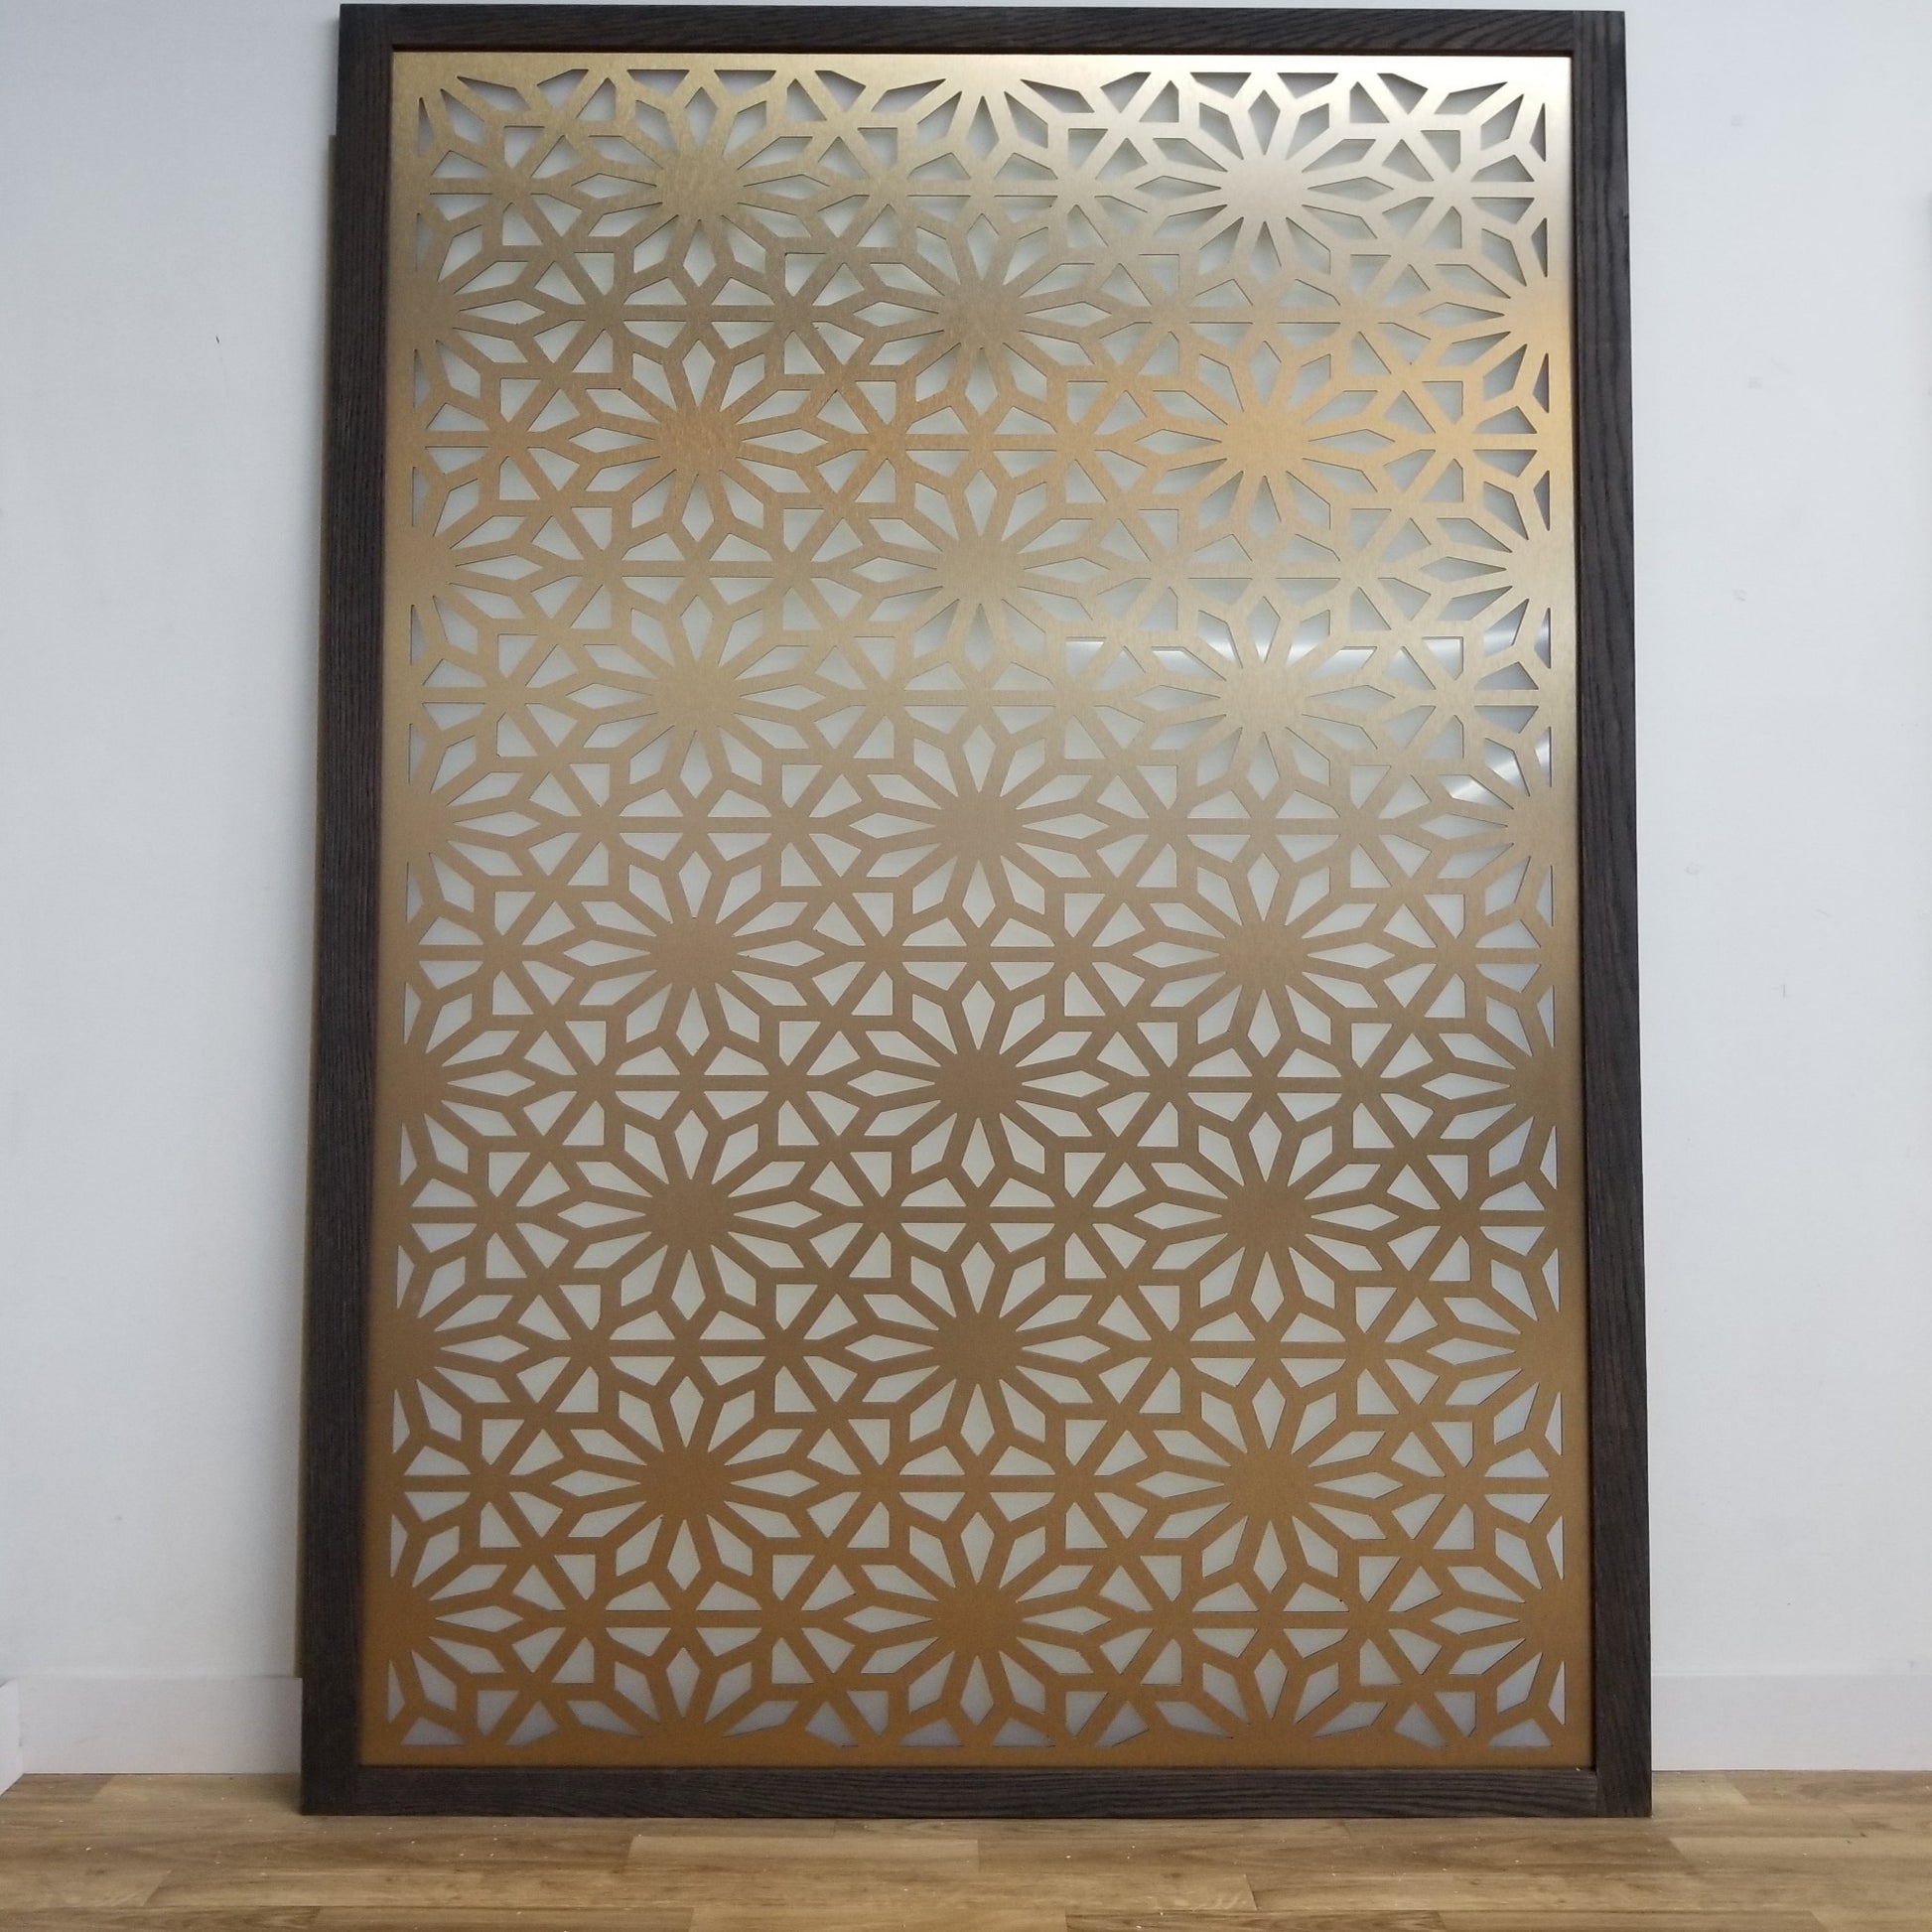 Room dividers, Partition Panel room divider , Room Divider, Custom Divider Screen, Panels CraftivaArt, Ikea room divider, room design, interior design, wall art, wall design, home decoration, wall panel, islamic design, mosque designe, mosque partition, mosque divider, masjid, mehrab, mihrab, islamic panel, islamic room divider